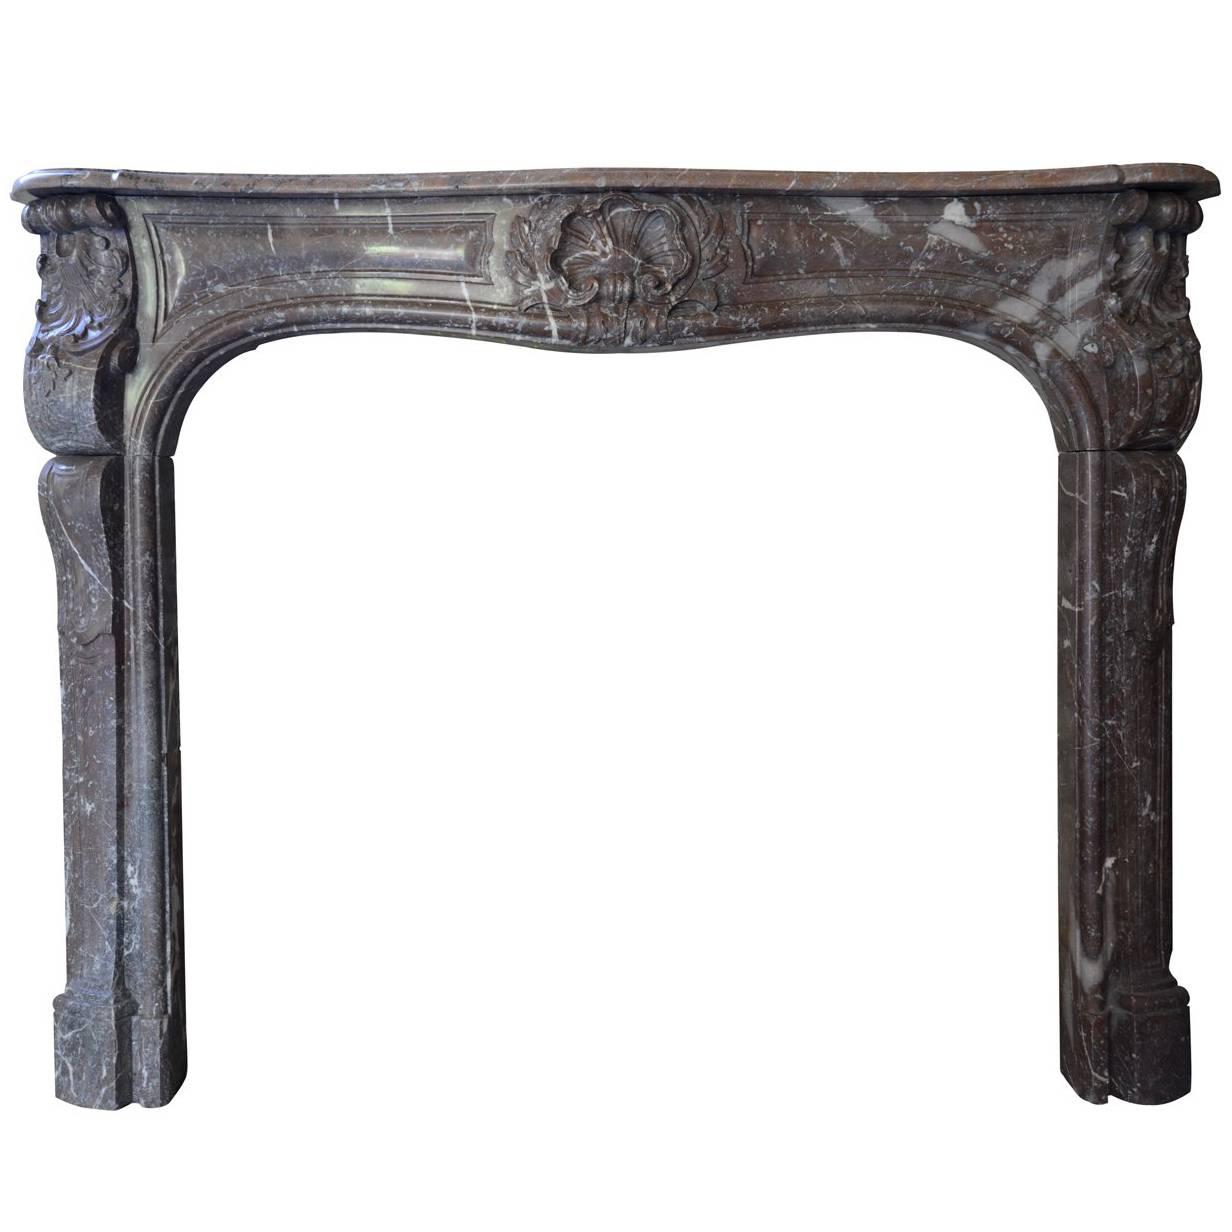 French Louis XV Style in Royal Red Marble Fireplace, 19th Century For Sale